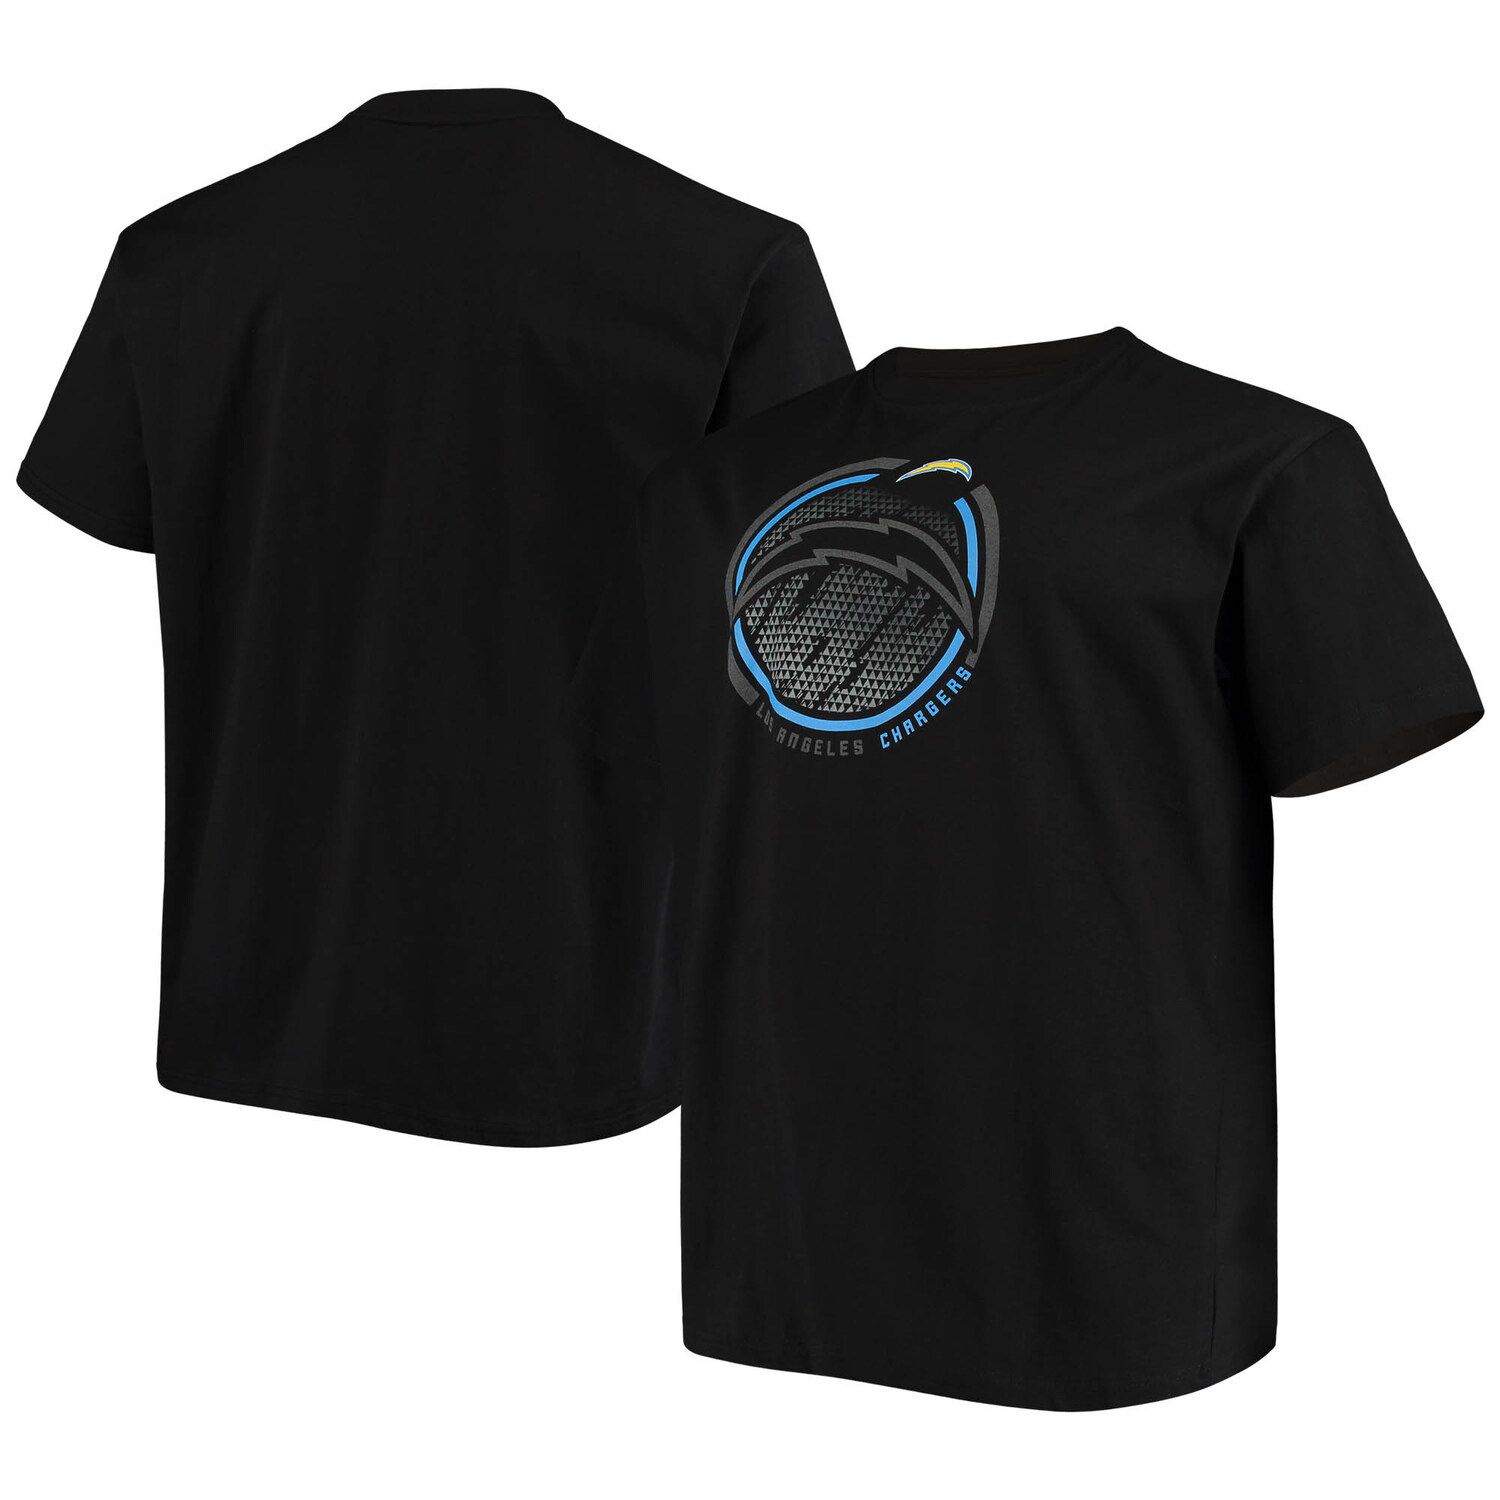 Los Angeles Chargers Refried Apparel Sustainable Split T-Shirt -  Black/Heathered Gray